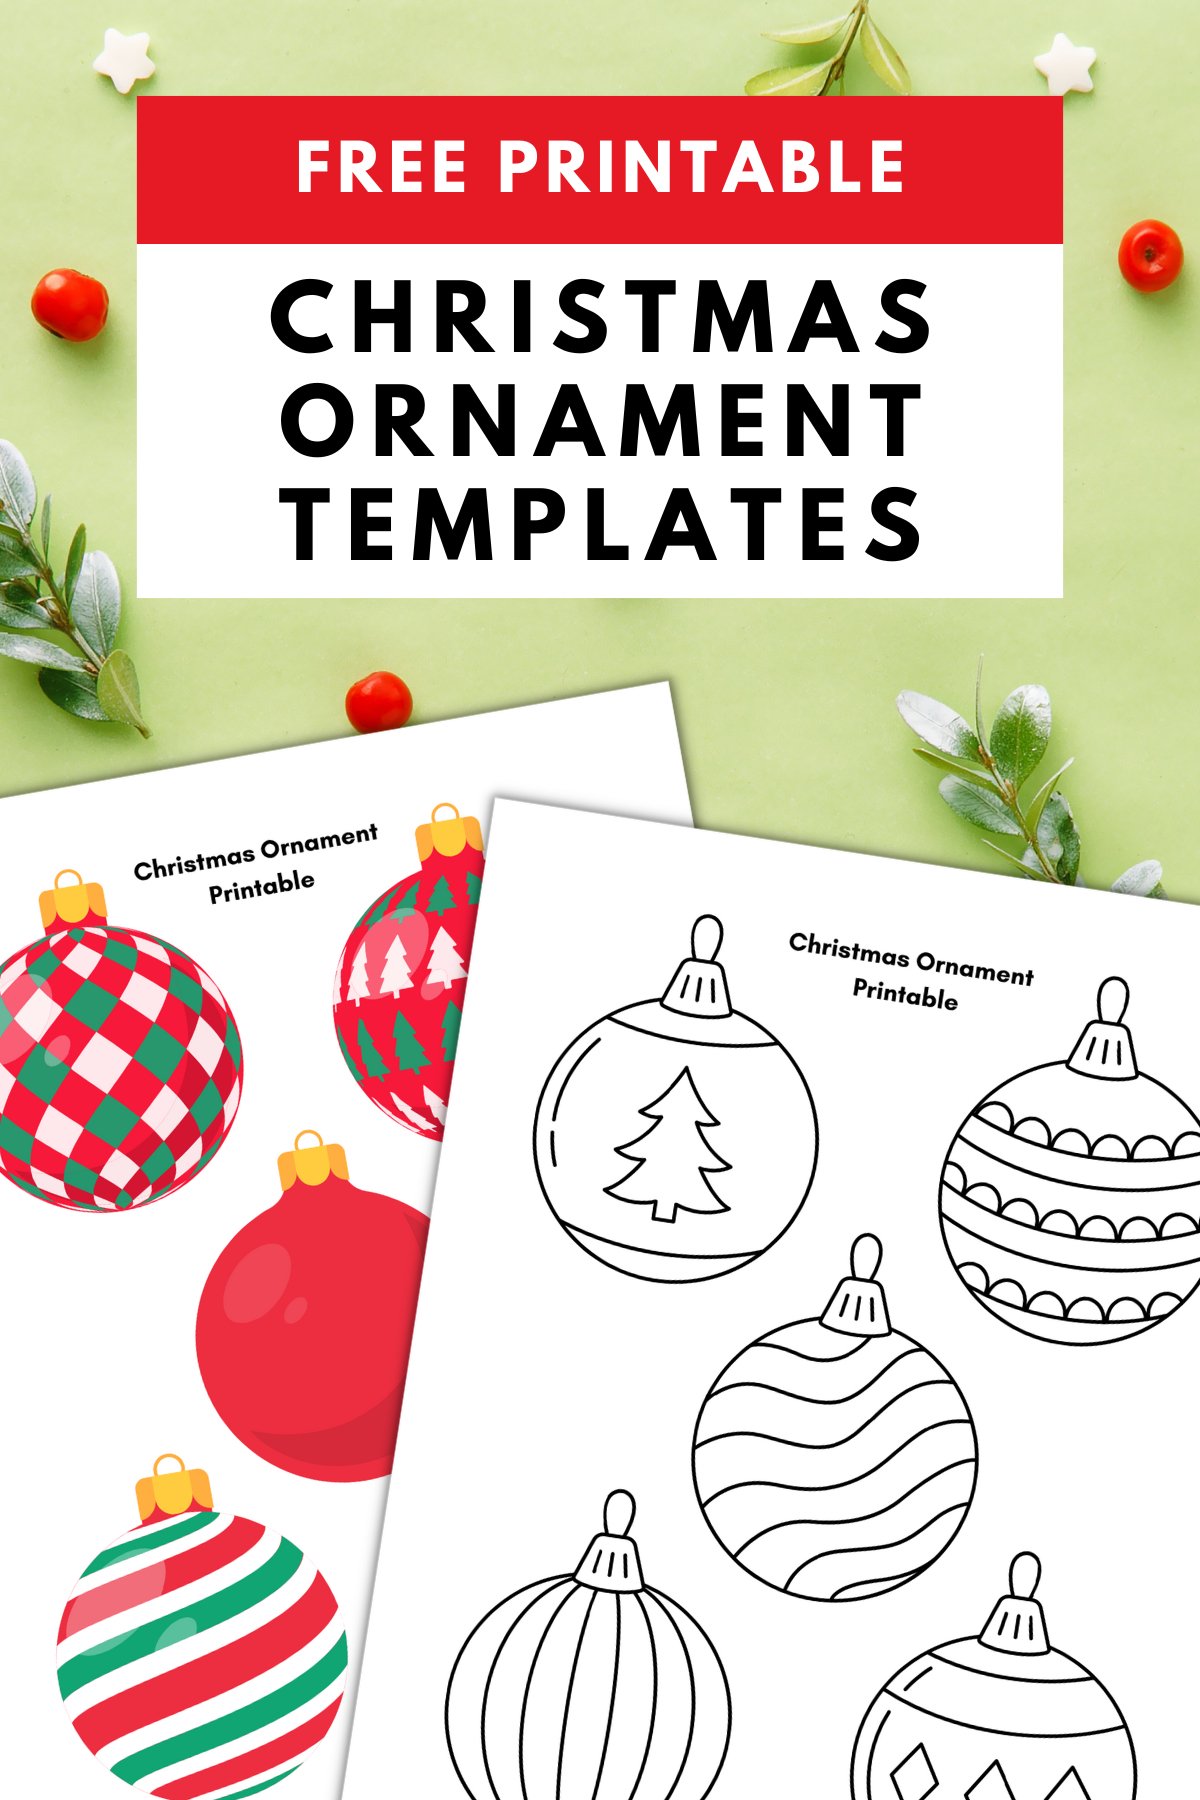 Miniature Christmas Decorations Stock Photo - Download Image Now